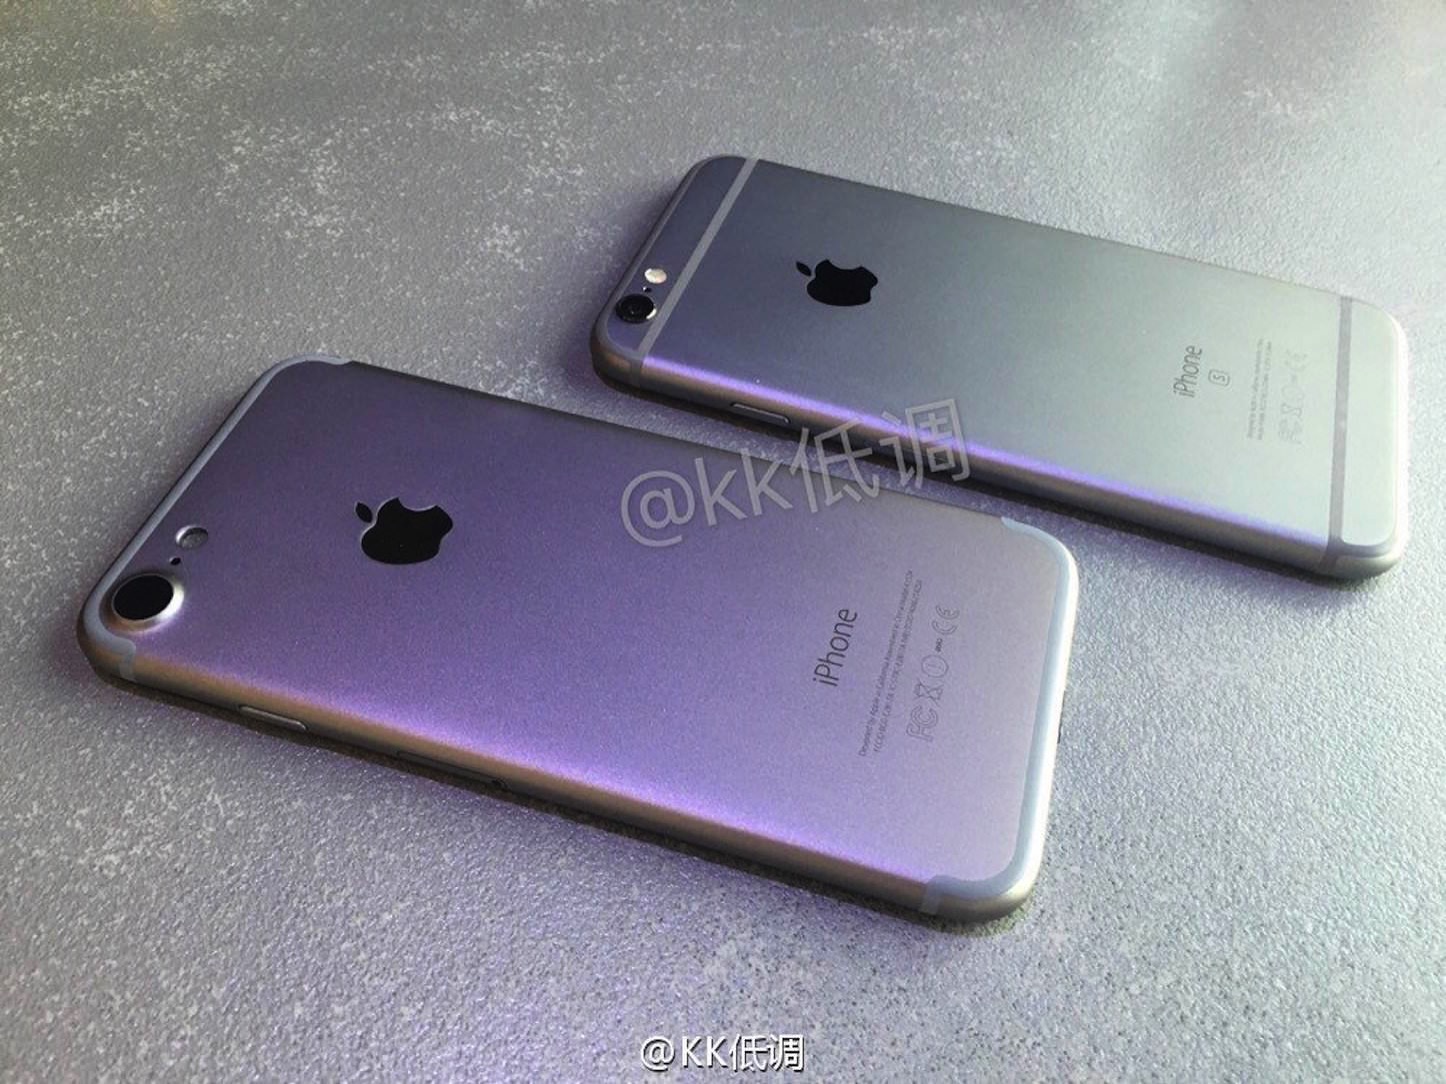 New-Photos-of-iPhone7-and-iPhone6s.jpg